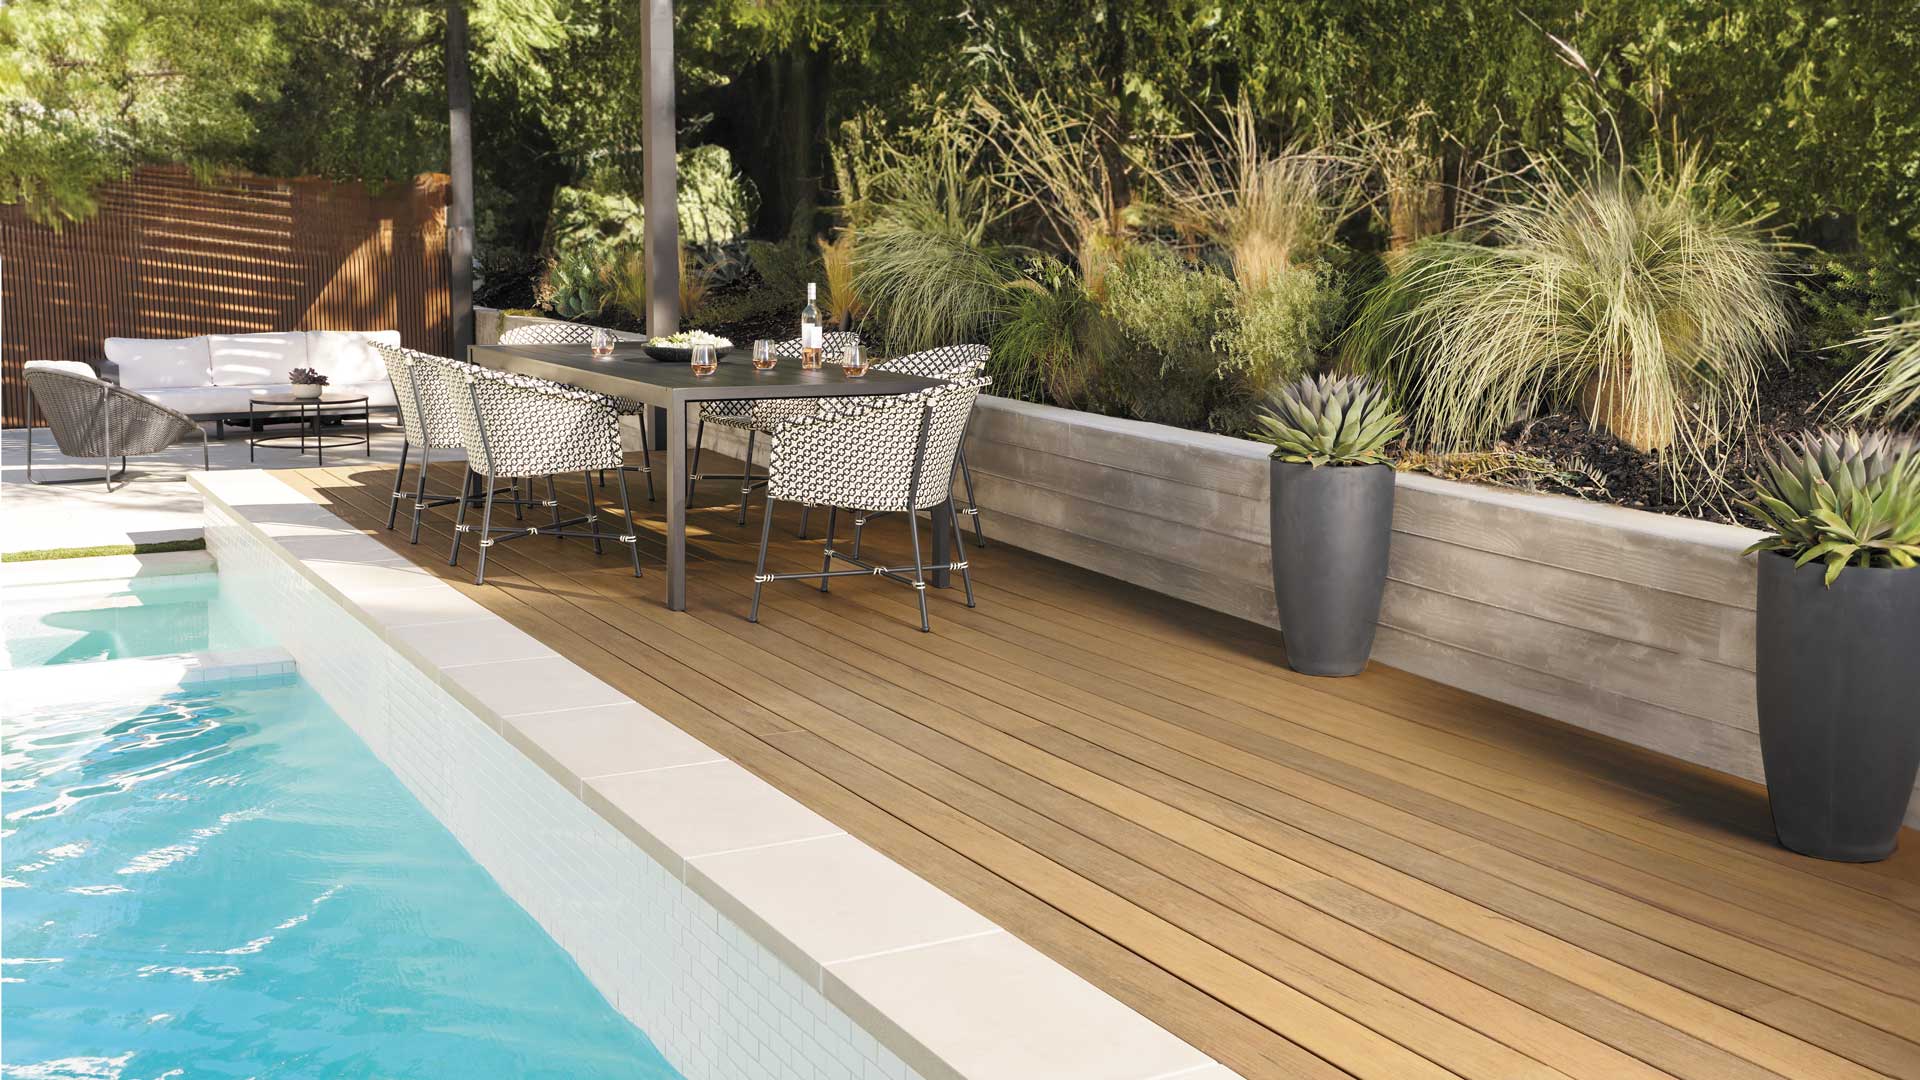 A poolside deck built with Tigerwood deck boards from the TimberTech Composite Legacy Collection